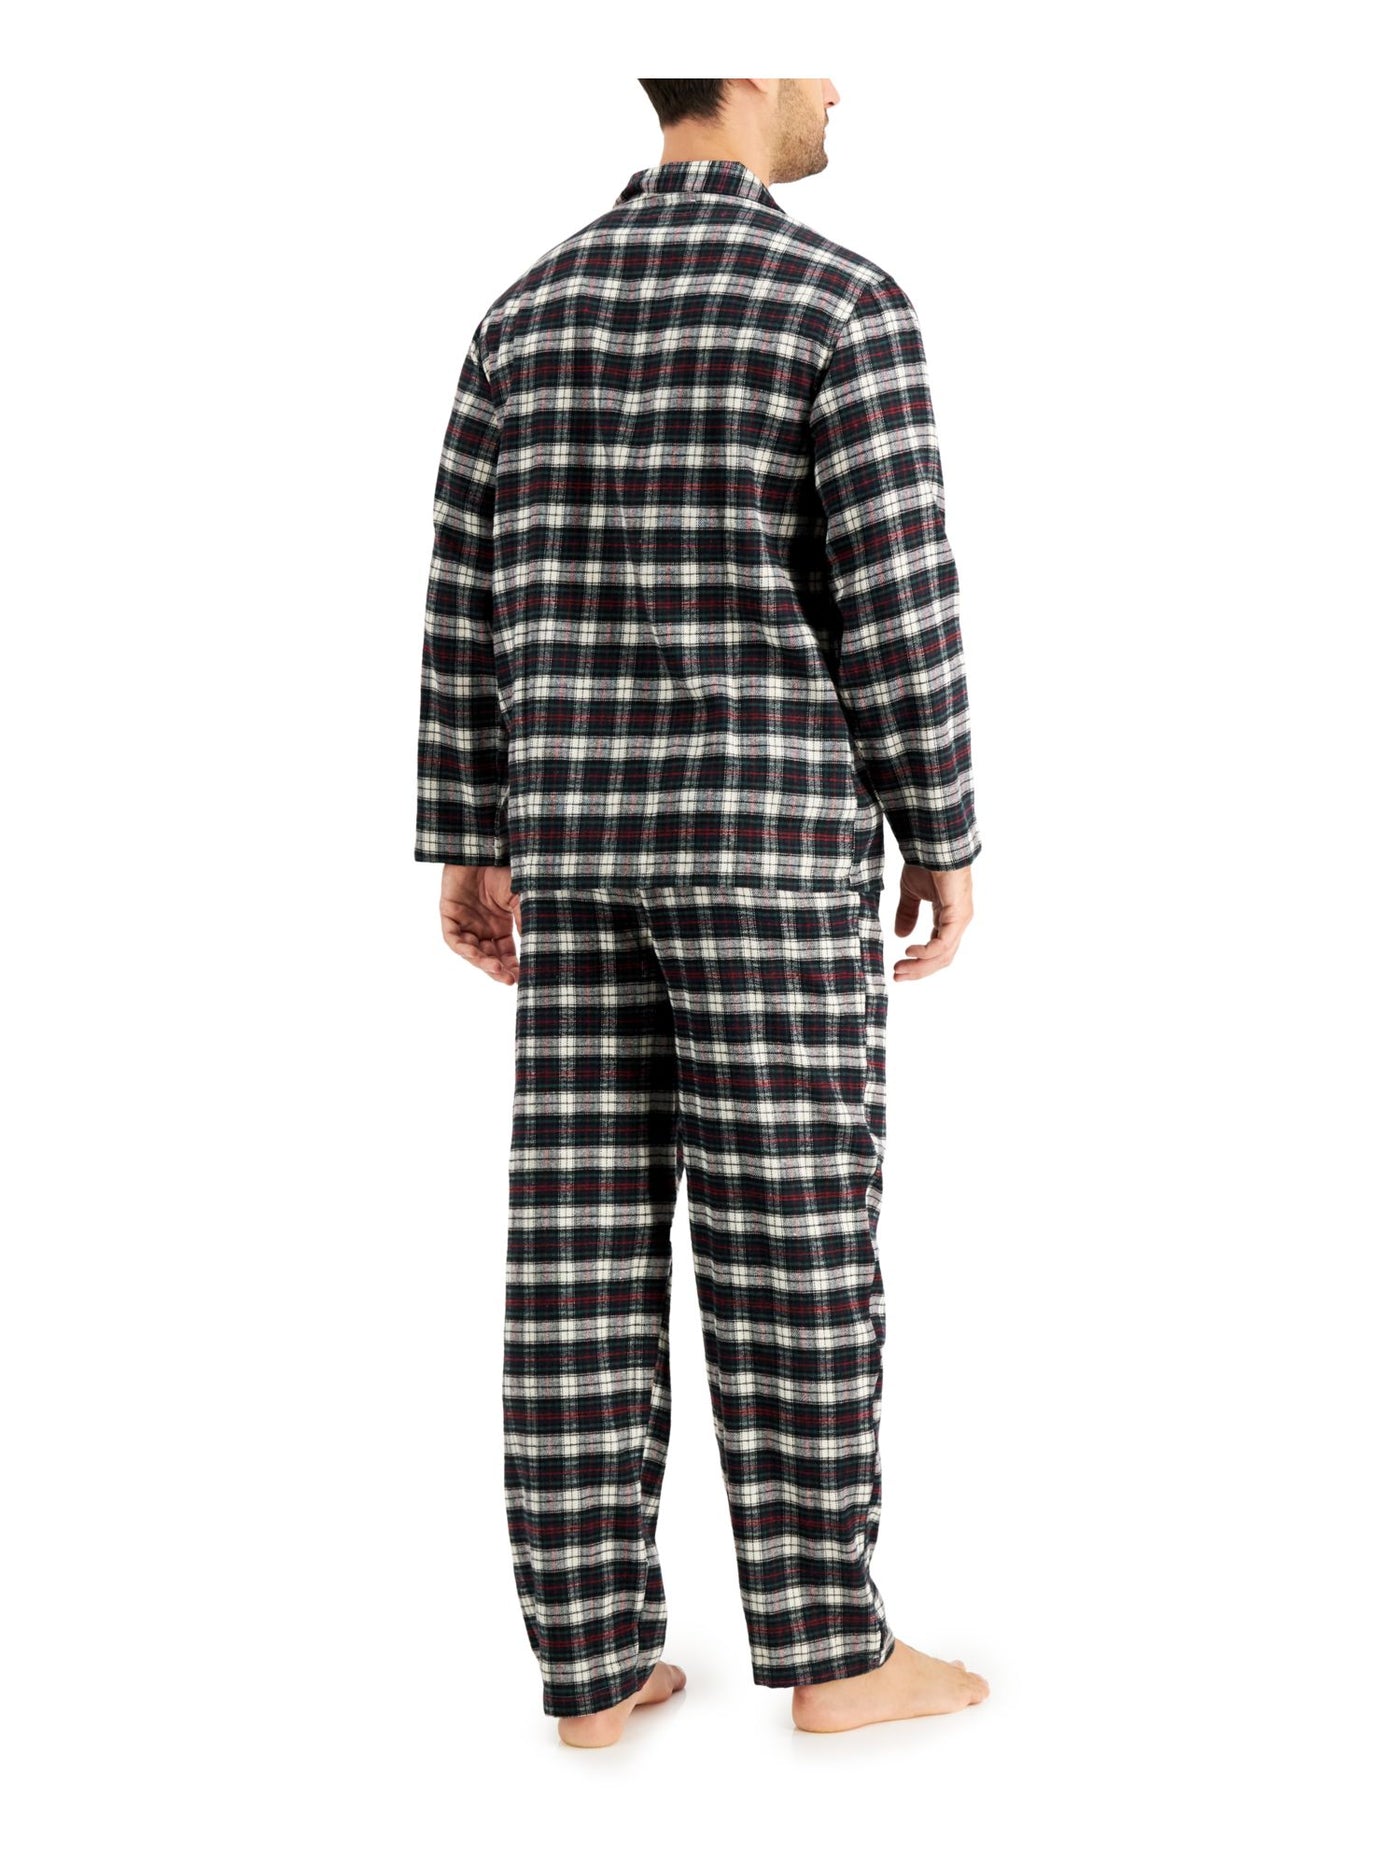 CLUBROOM Mens Green Plaid Pocketed Long Sleeve Button Up Top Straight leg Pants Pajamas XXL